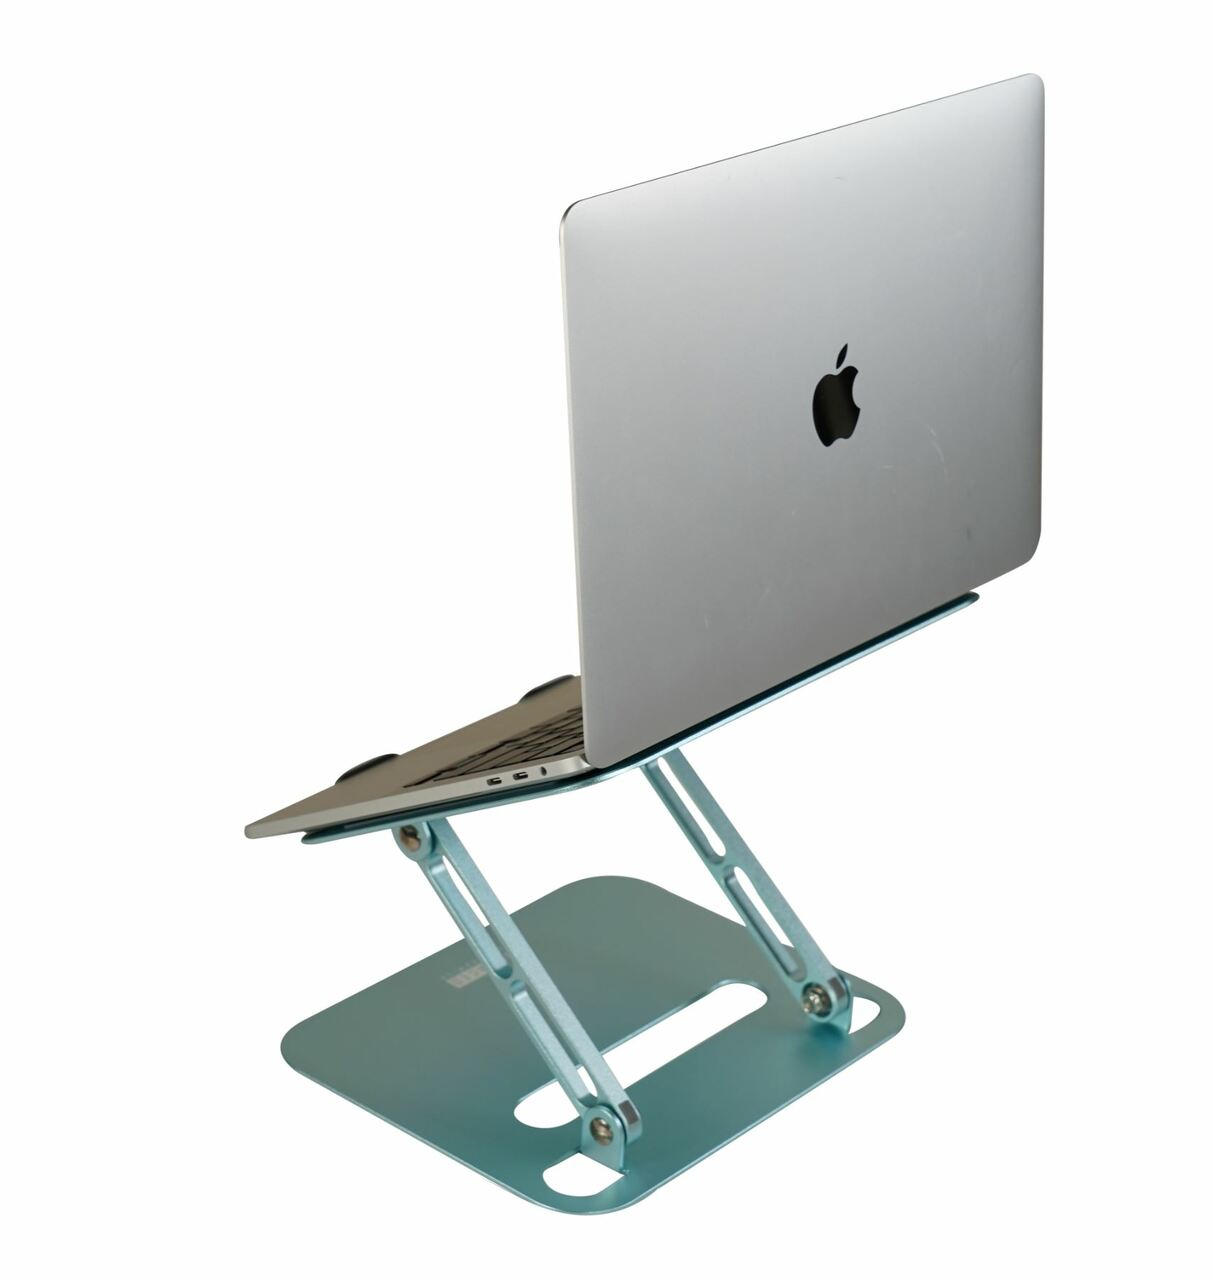 Aluminum laptop stand for desk. The adjustable height blue aluminum laptop stand is a perfect desktop laptop stand